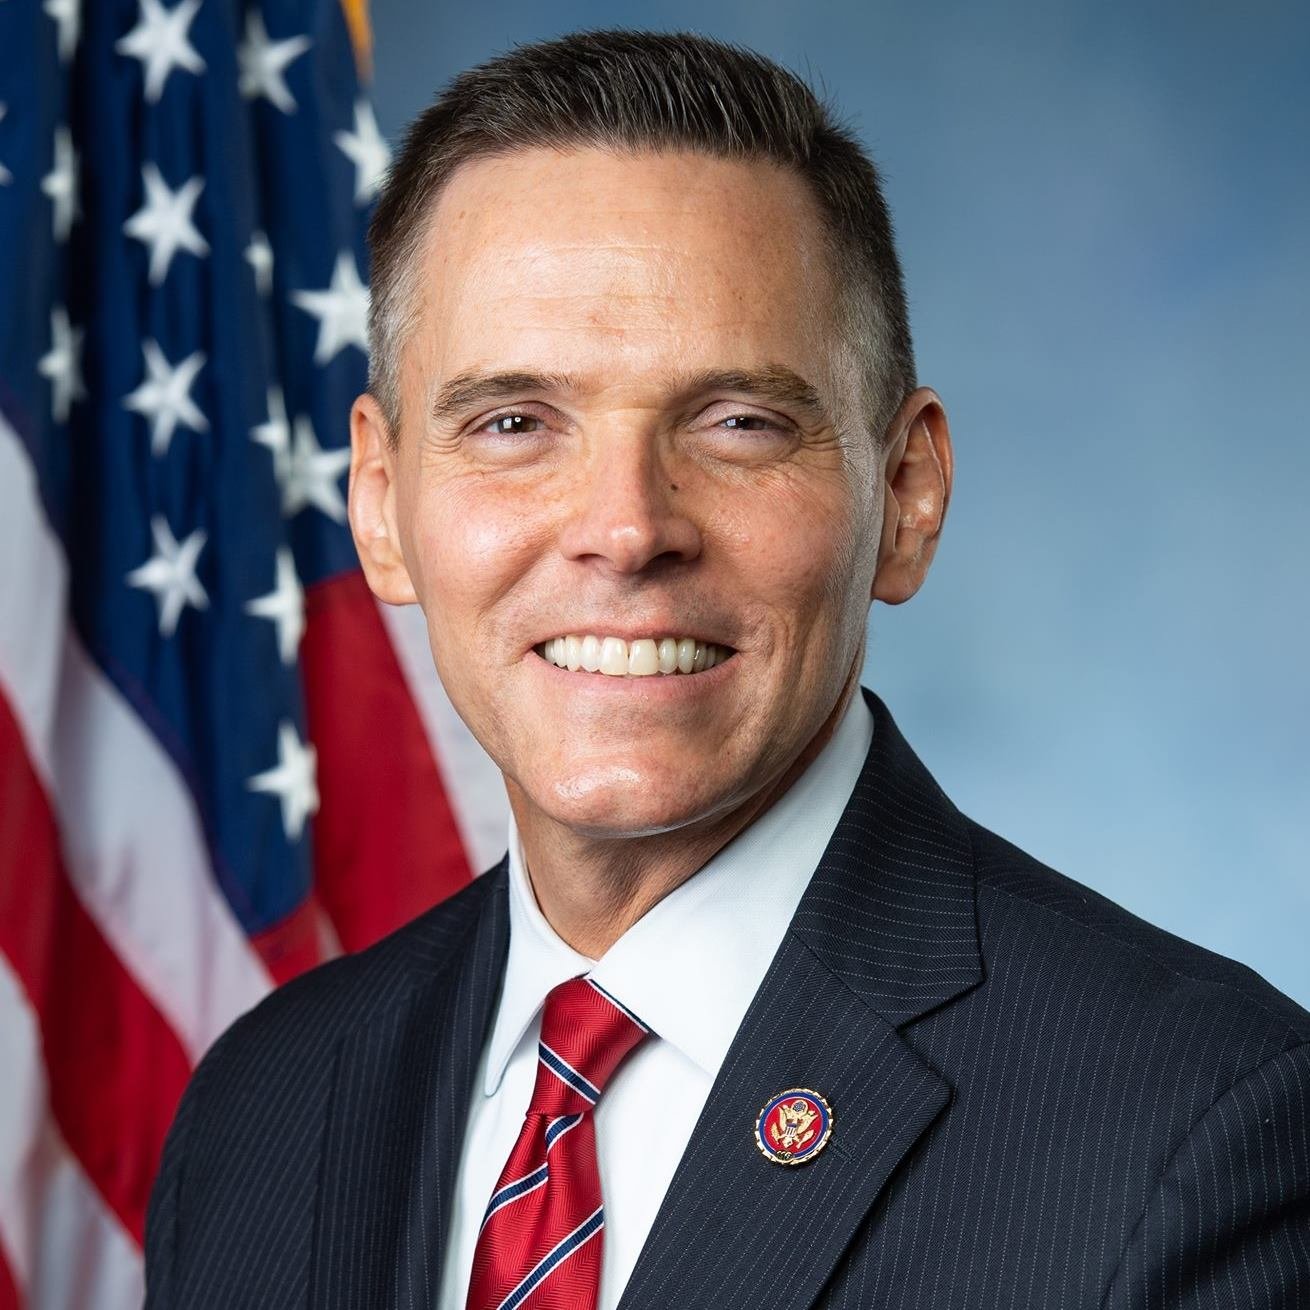 This account has been archived. Former Rep. Ross Spano proudly Represented #FL15 in the U.S. House of Representatives from Jan. 2018 - Jan. 3, 2021.